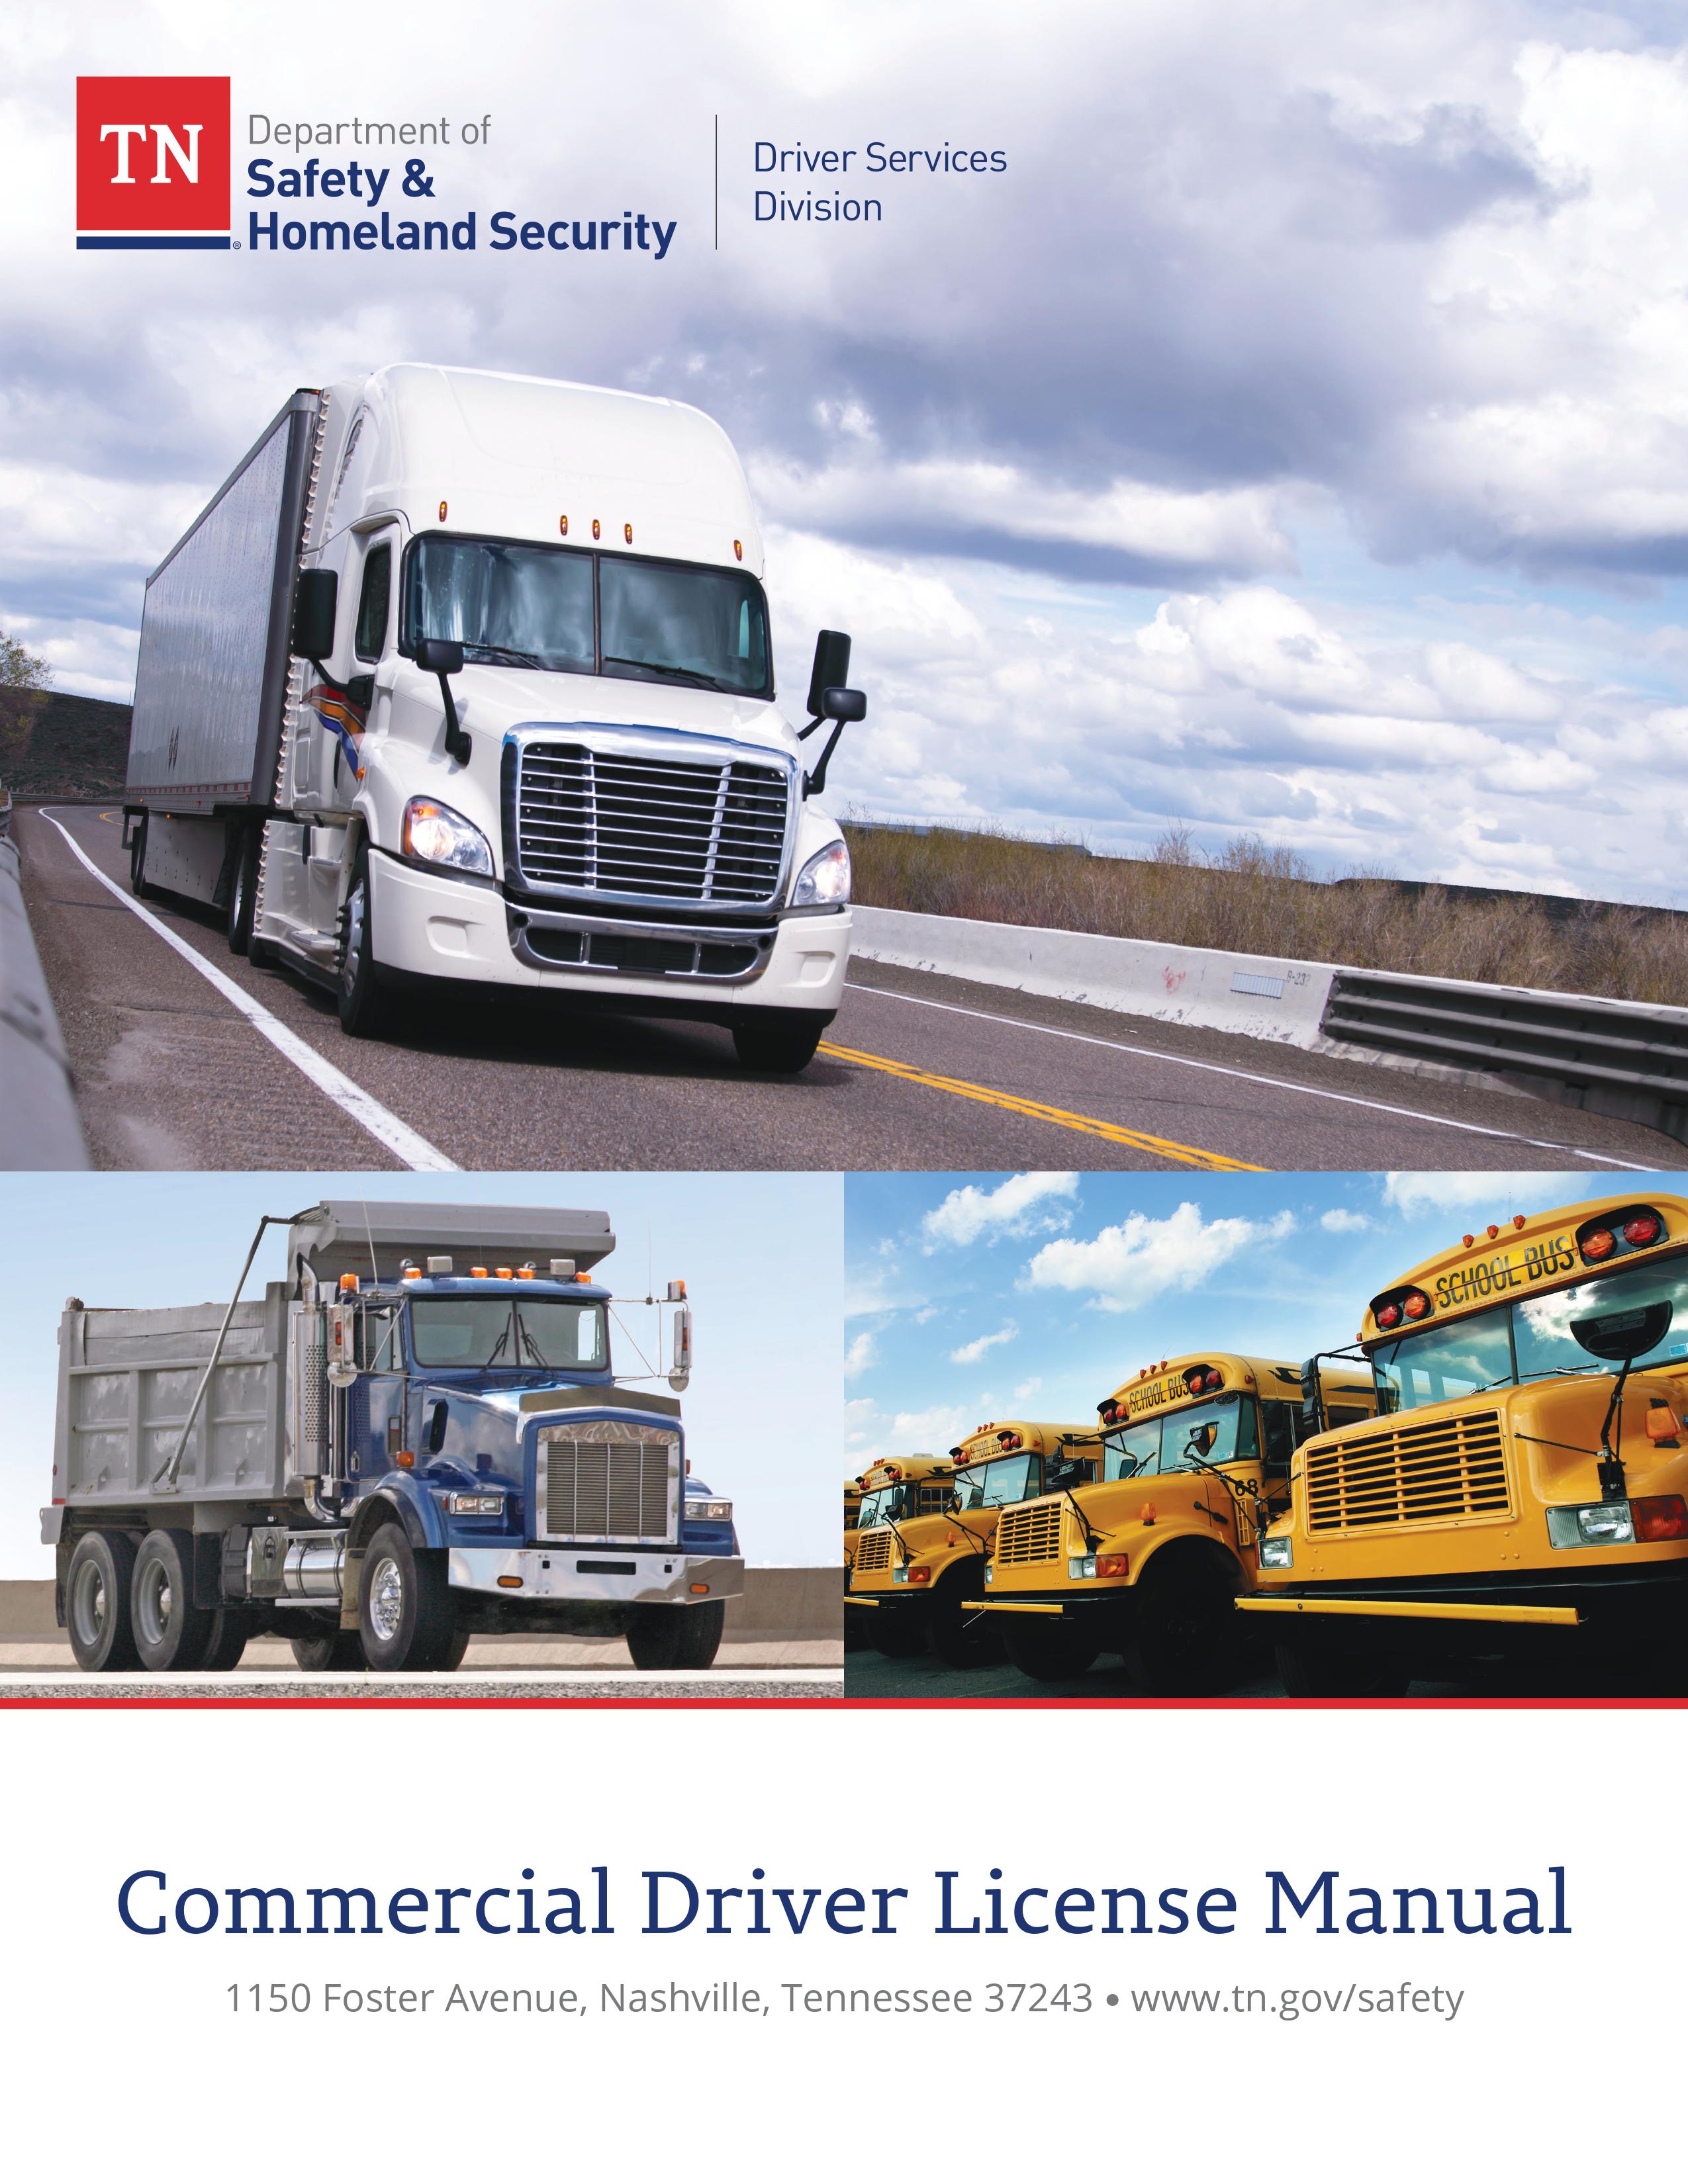 Tennessee's CDL Manual